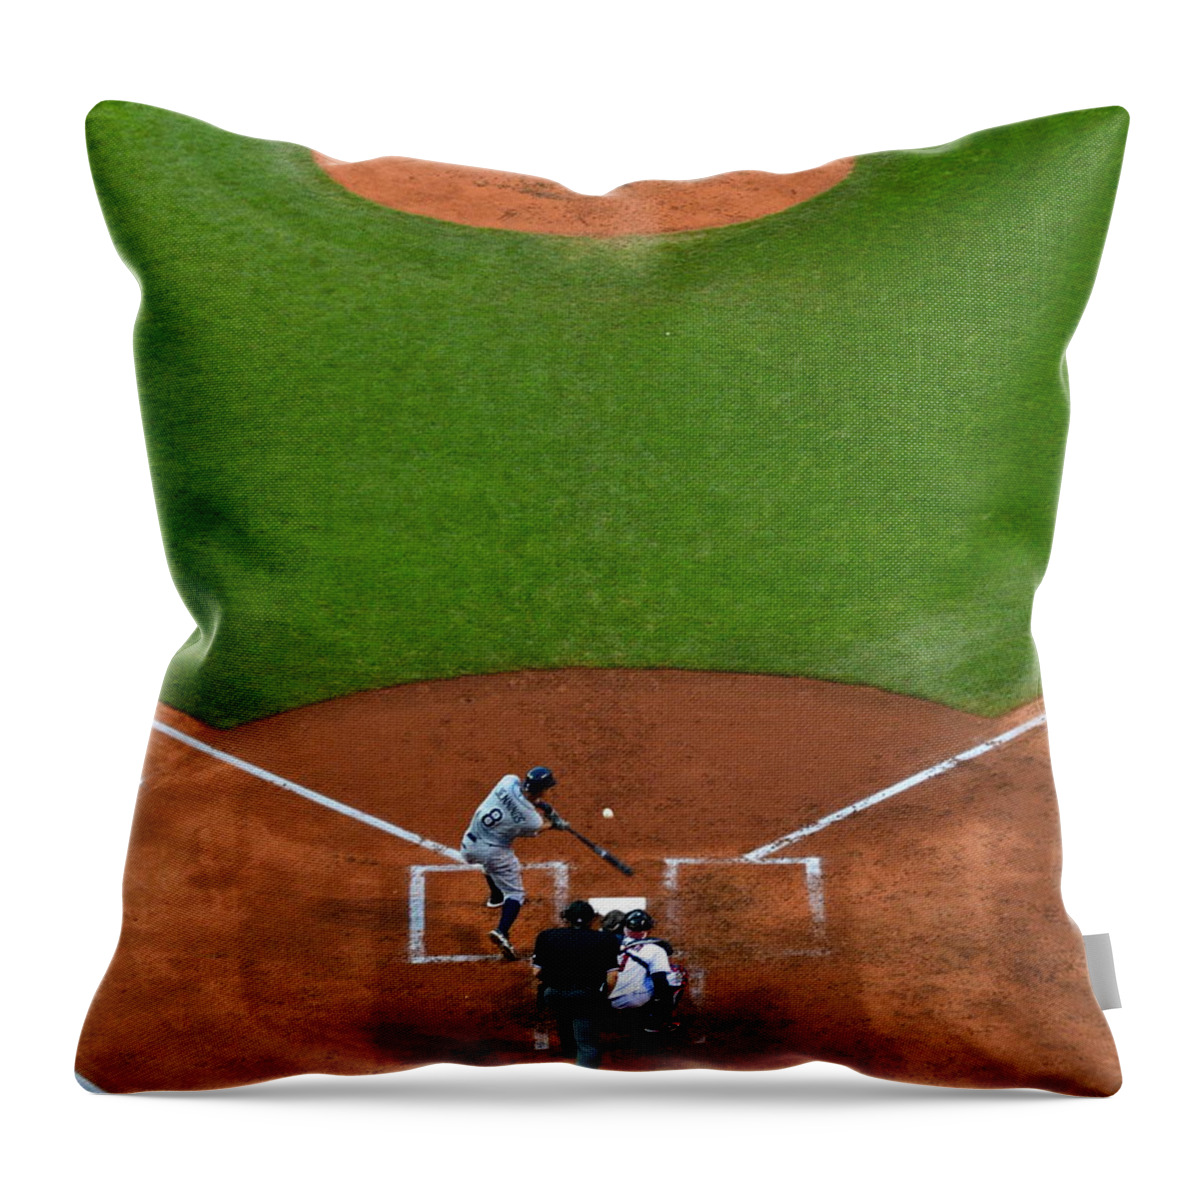 Cleveland Throw Pillow featuring the photograph Play Ball by Frozen in Time Fine Art Photography